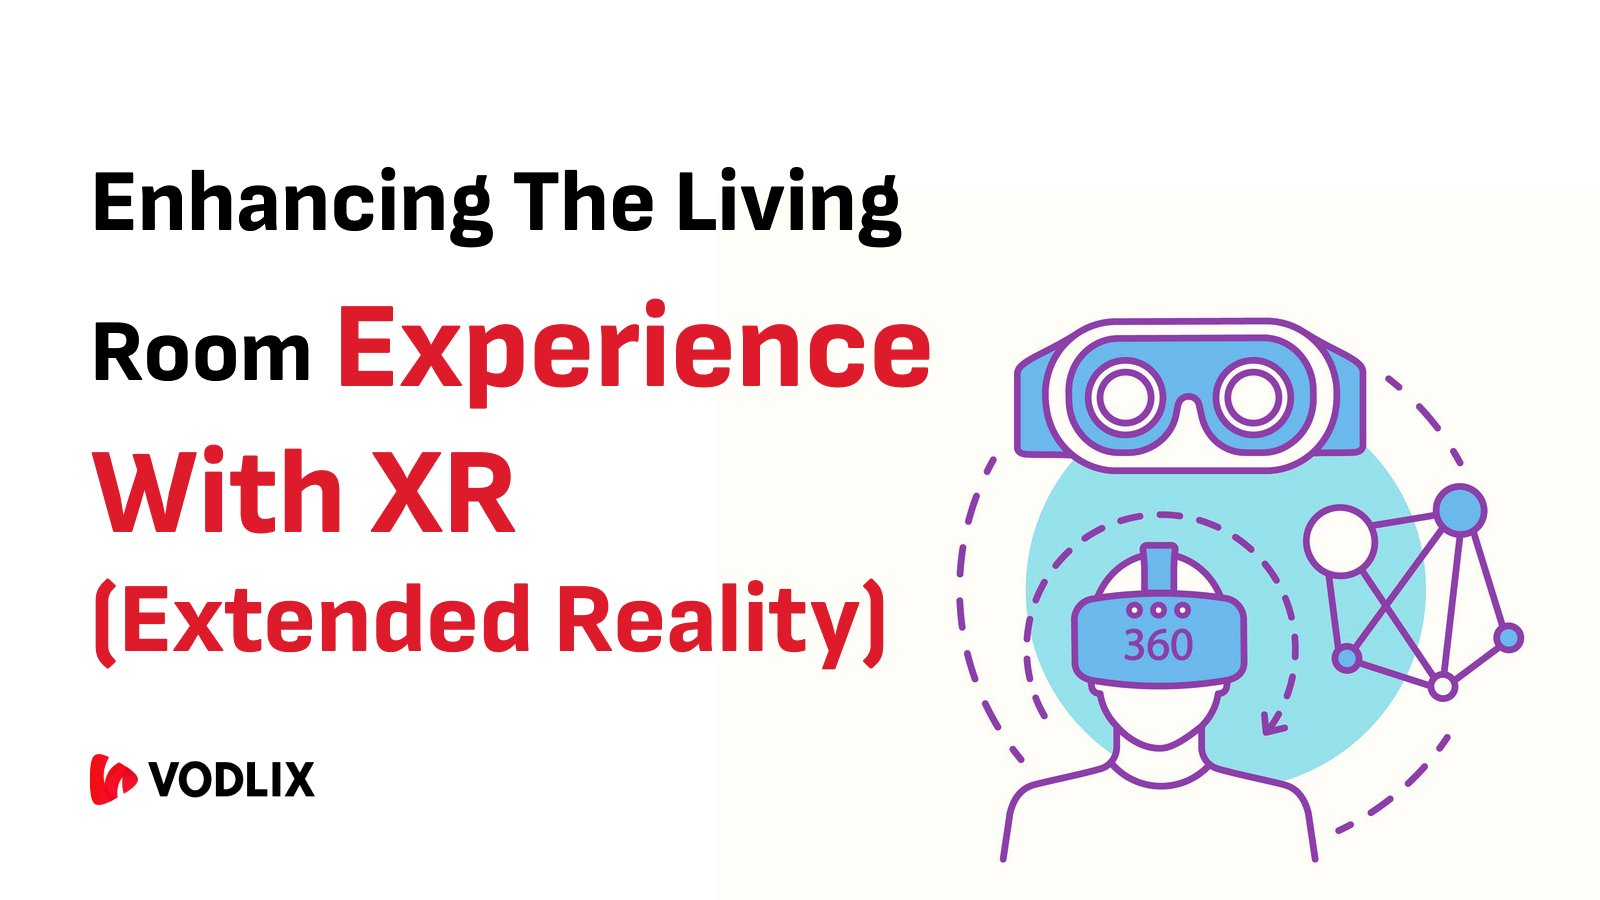 Enhancing the Living Room Experience with XR